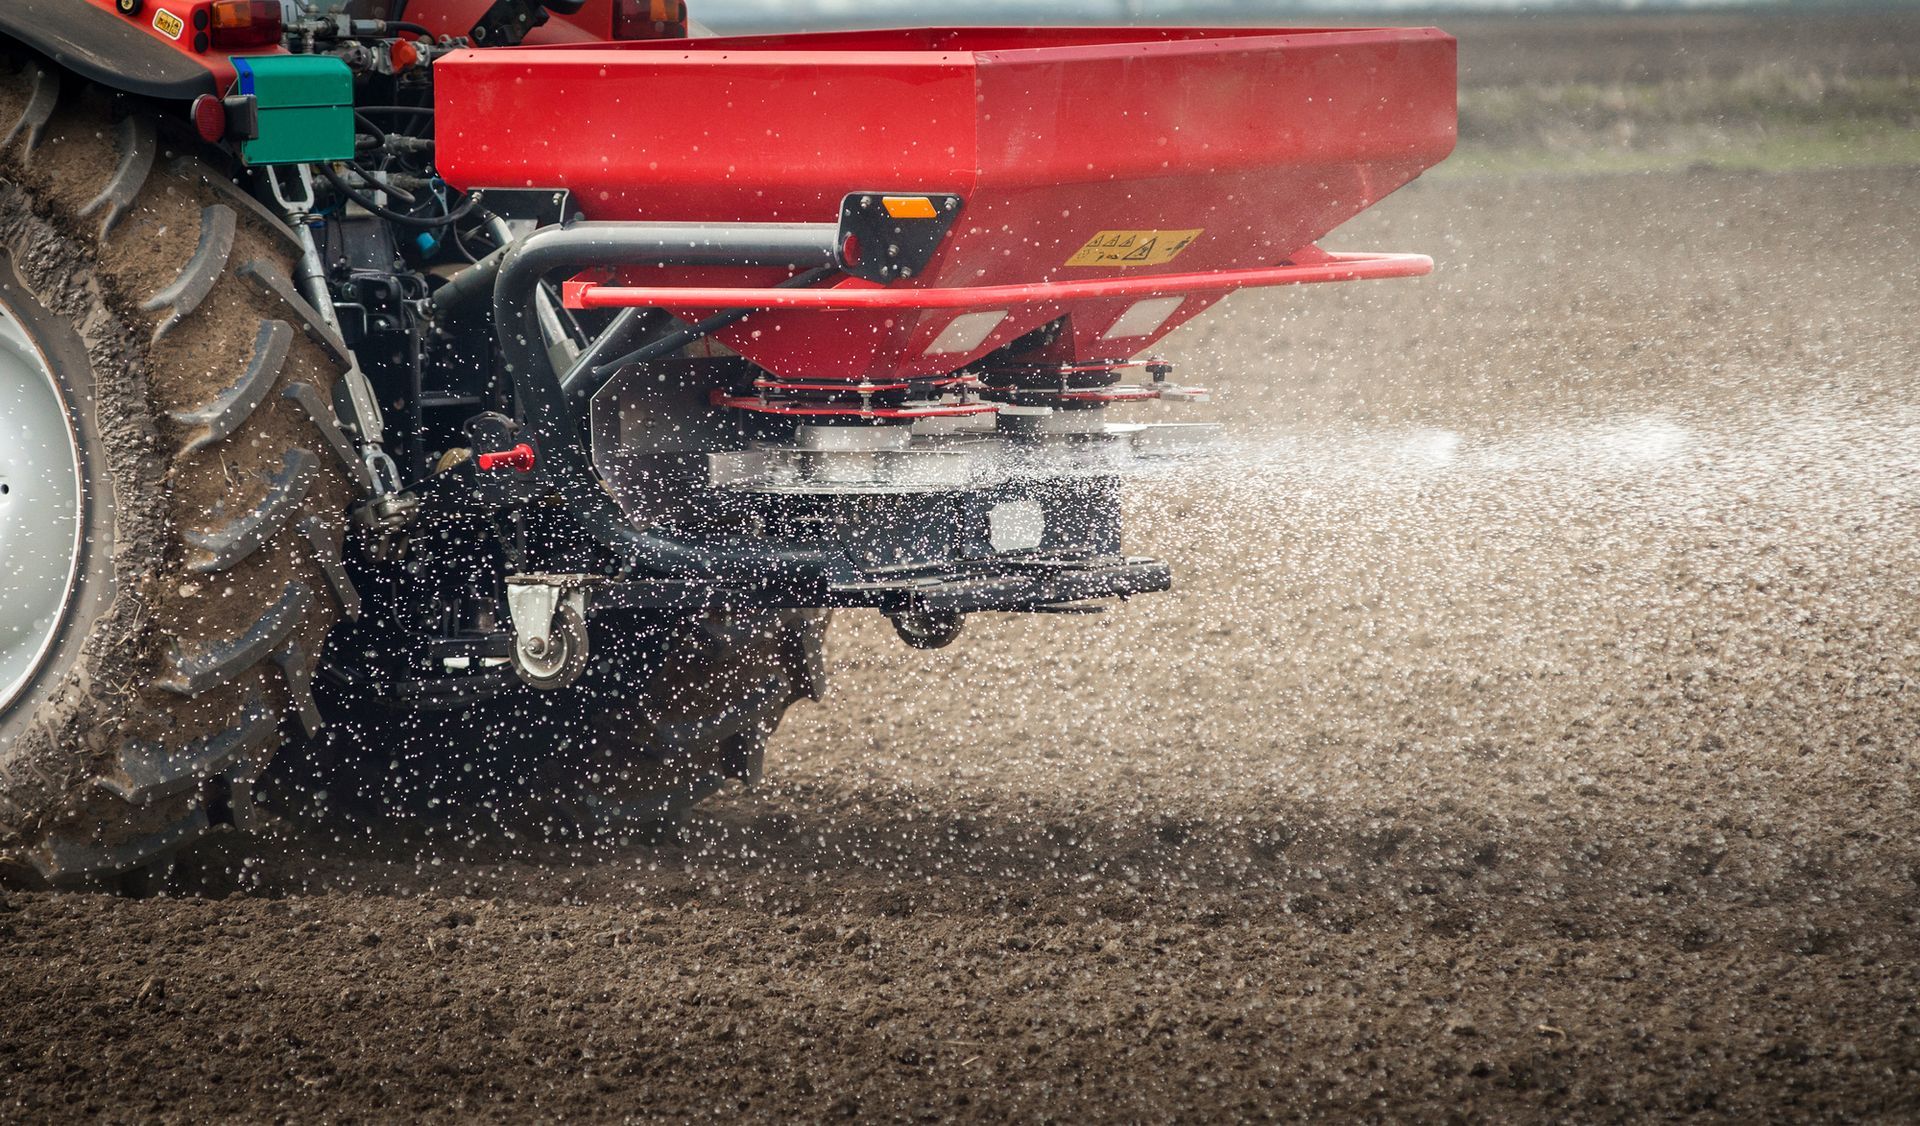 a red tractor is spraying fertilizer on a dirt field